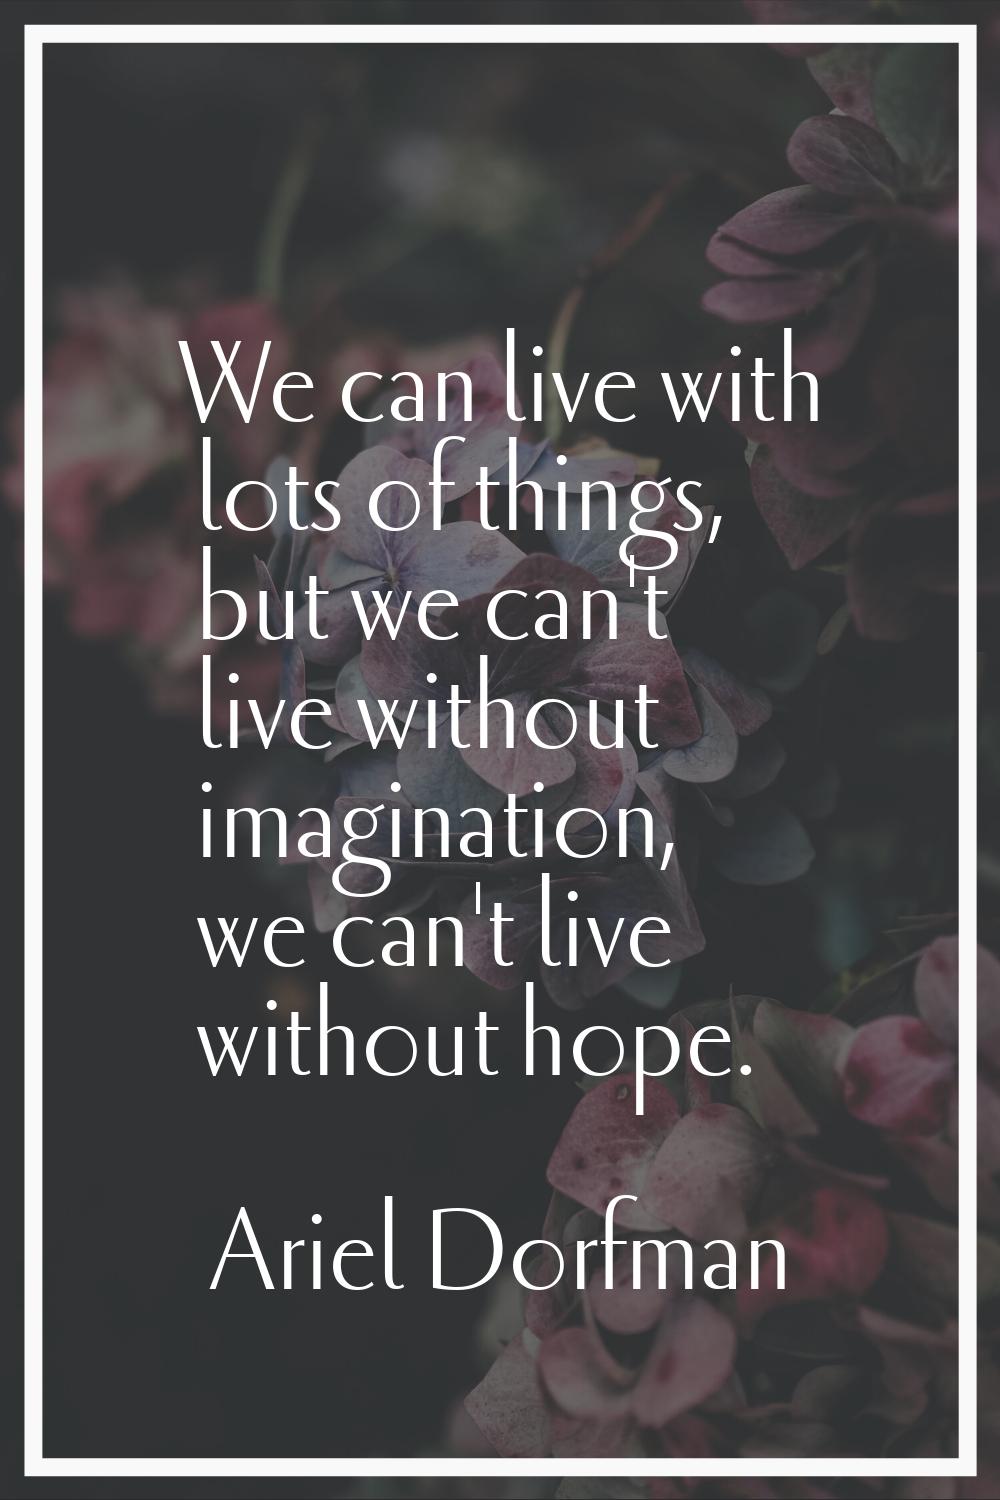 We can live with lots of things, but we can't live without imagination, we can't live without hope.